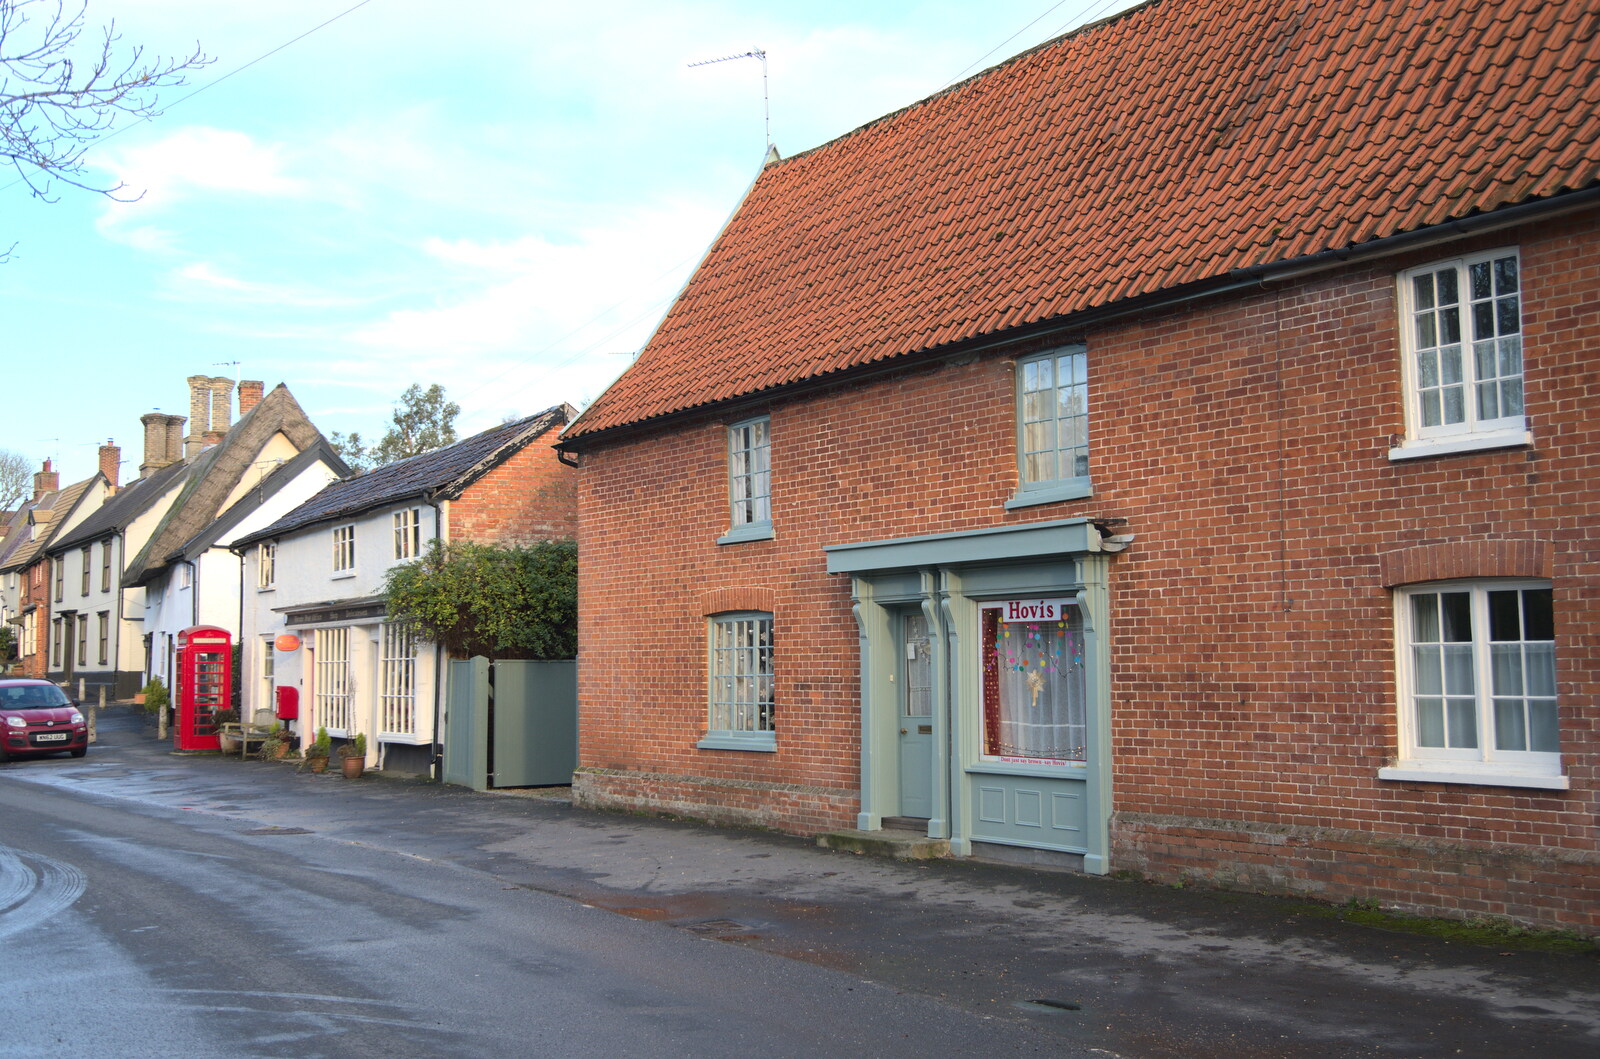 Winter Walks around Brome and Hoxne, Suffolk - 2nd January 2023: An old shop with a Hovis sign